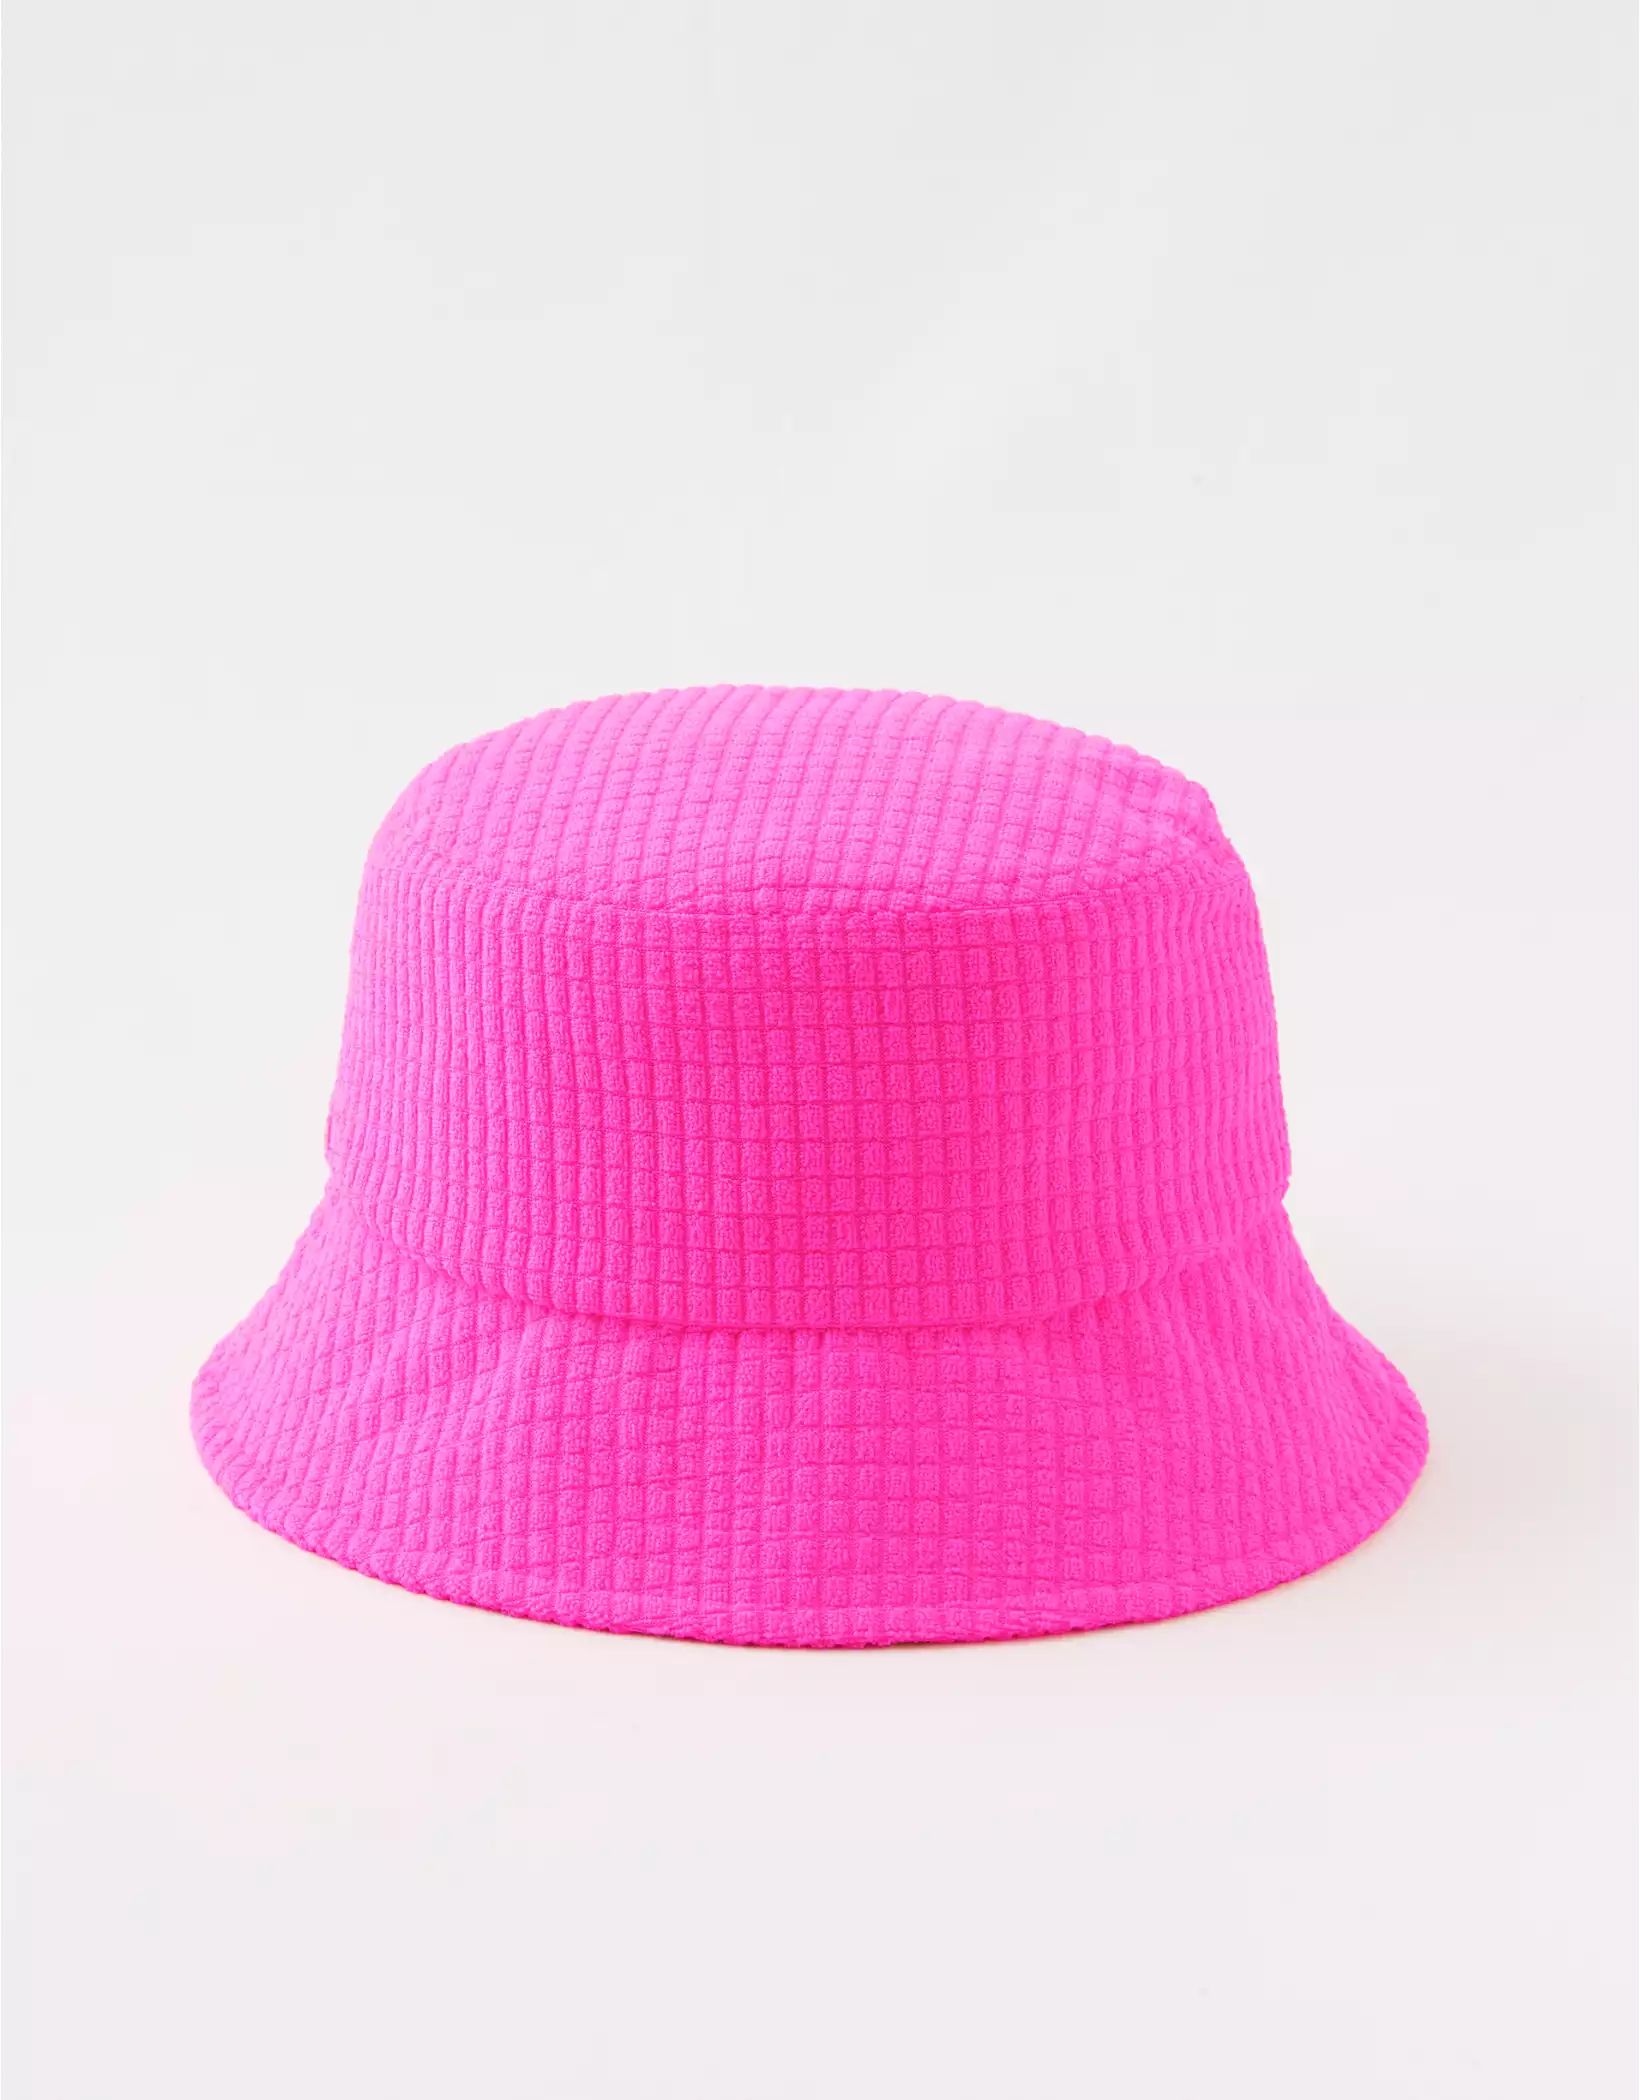 Aerie Terry Square Bucket Hat | Aerie